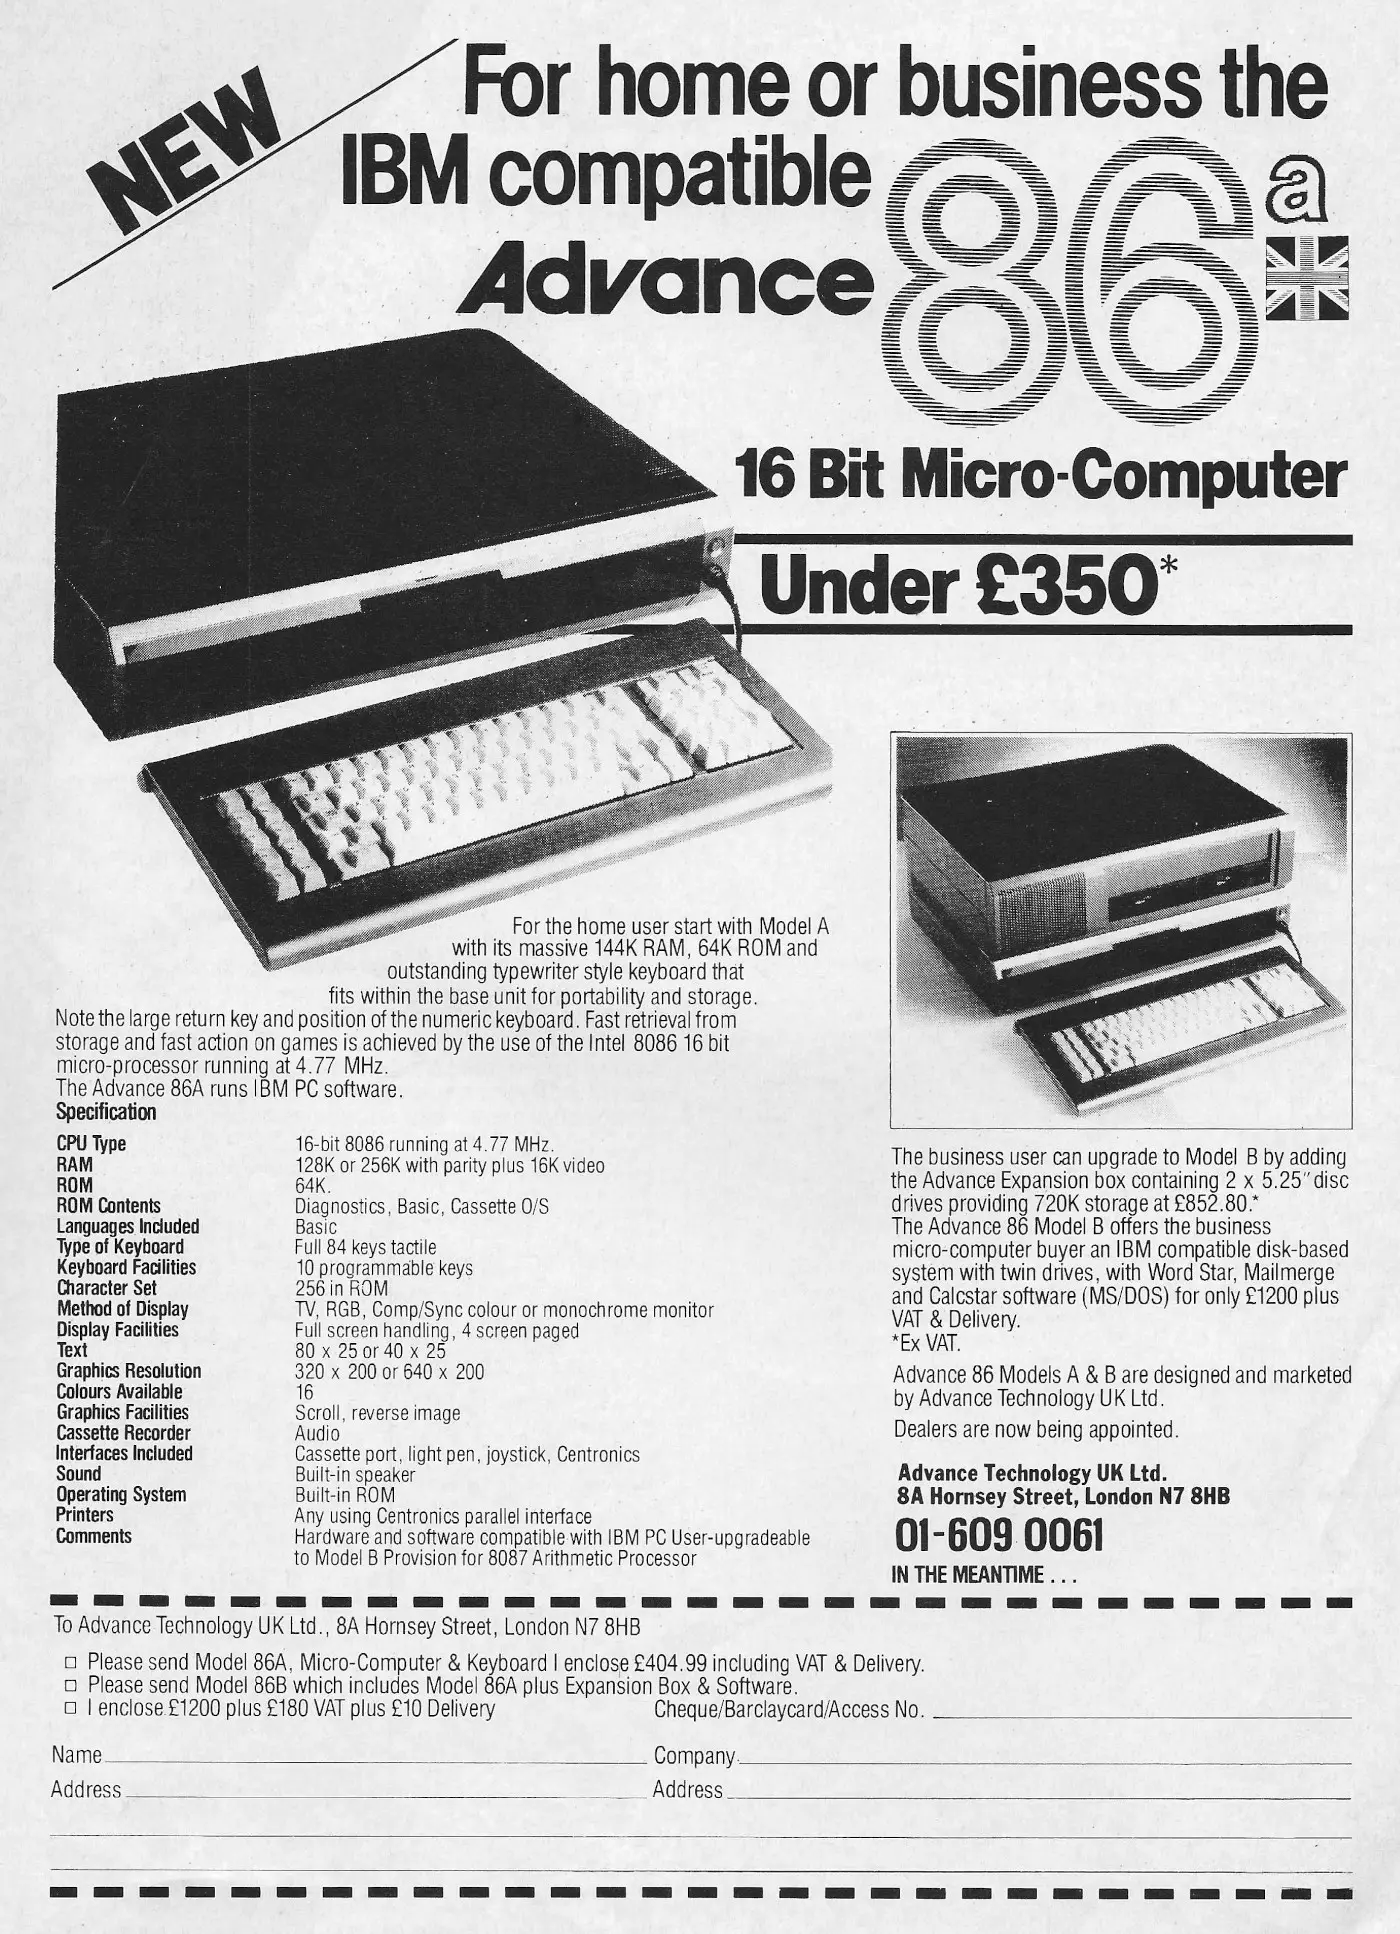 Advance Advert: <b>For home or business the IBM compatible Advance 86a</b>, from Your Computer, May 1984